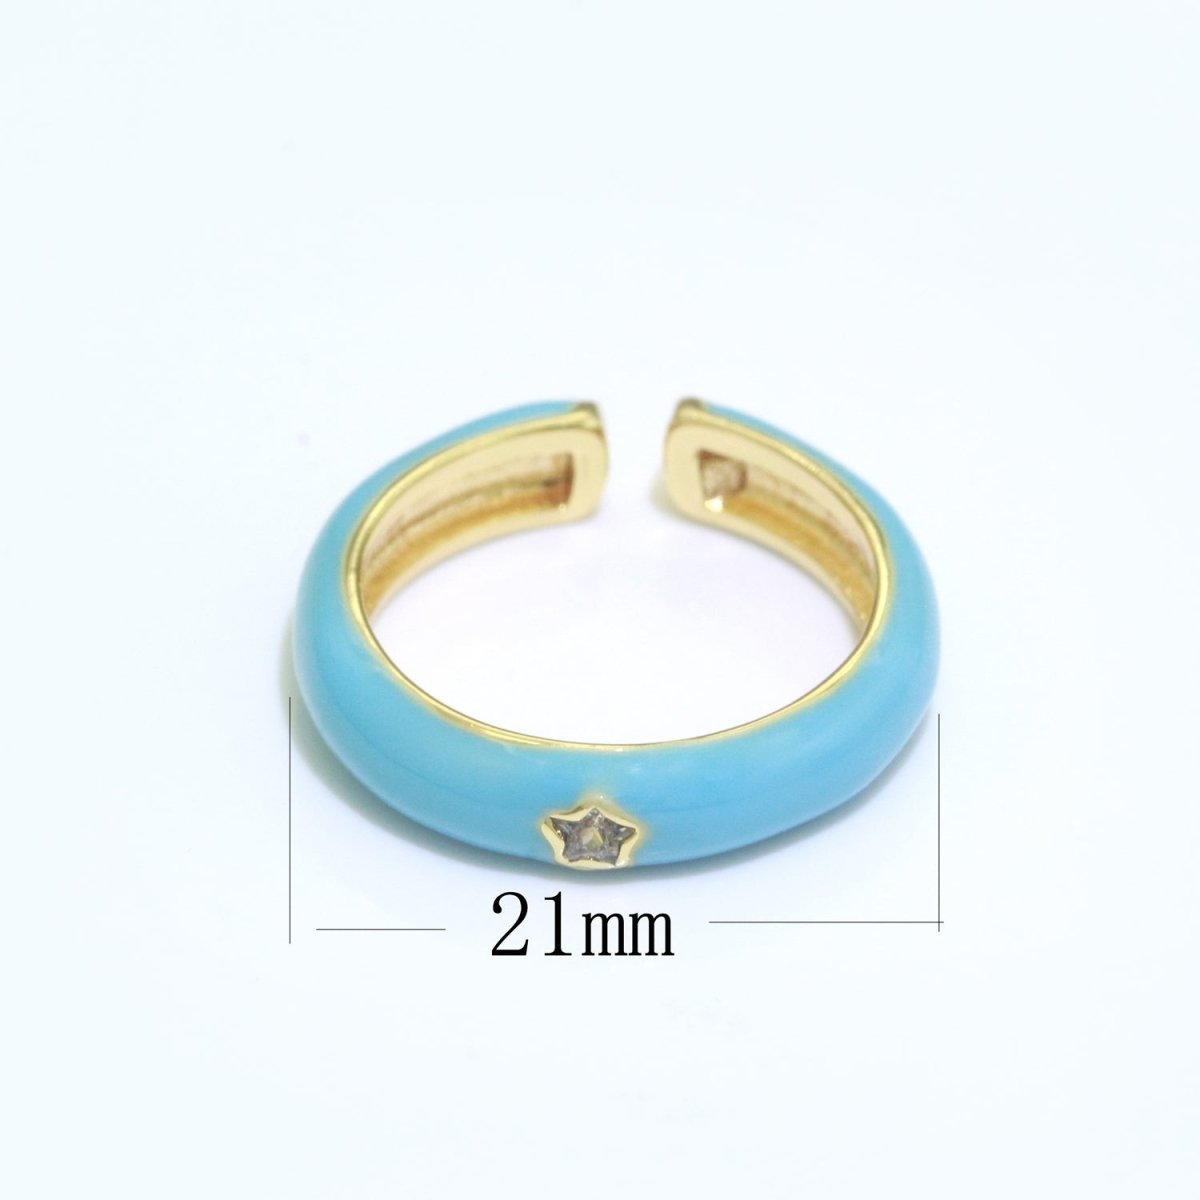 Stacking Enamel Bands Star Ring White Black Blue Teal Band Ring Colorful Jewelry Gold Filled Open Adjustable Ring For Gift S-103~S-107 - DLUXCA